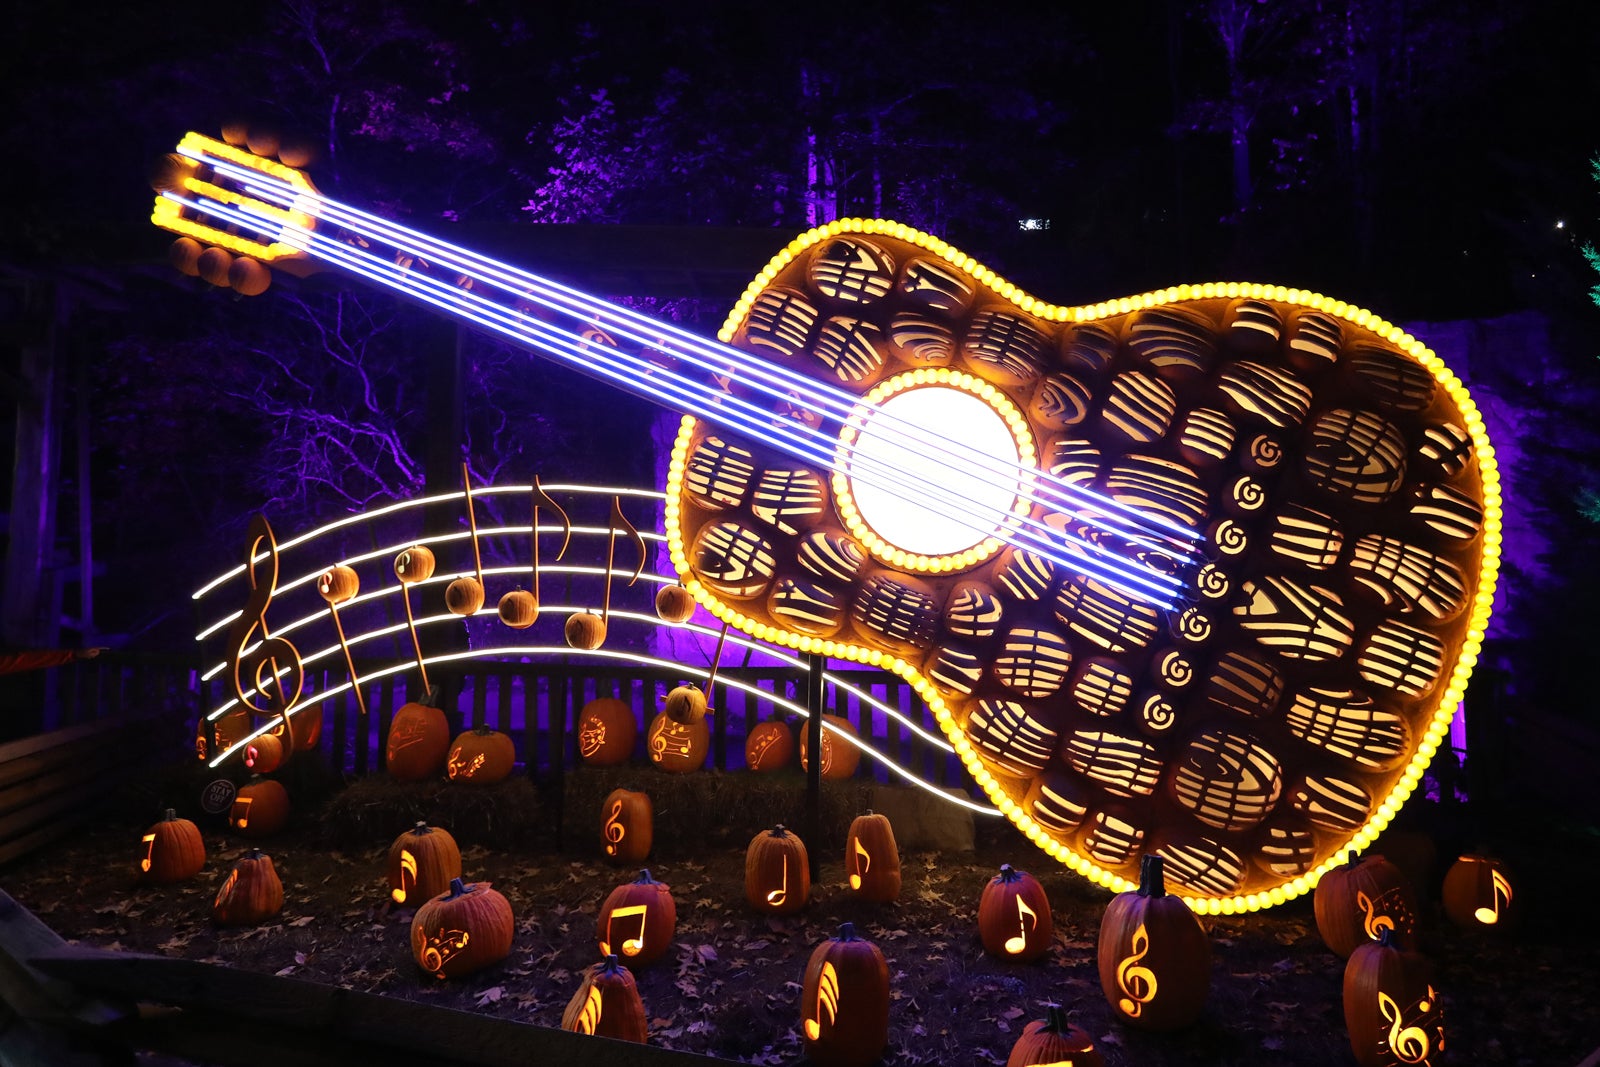 Atmosphere of the Great Pumpkin LumiNights held at Dollywood on October 27, 2019 in Pigeon Forge, TN. 